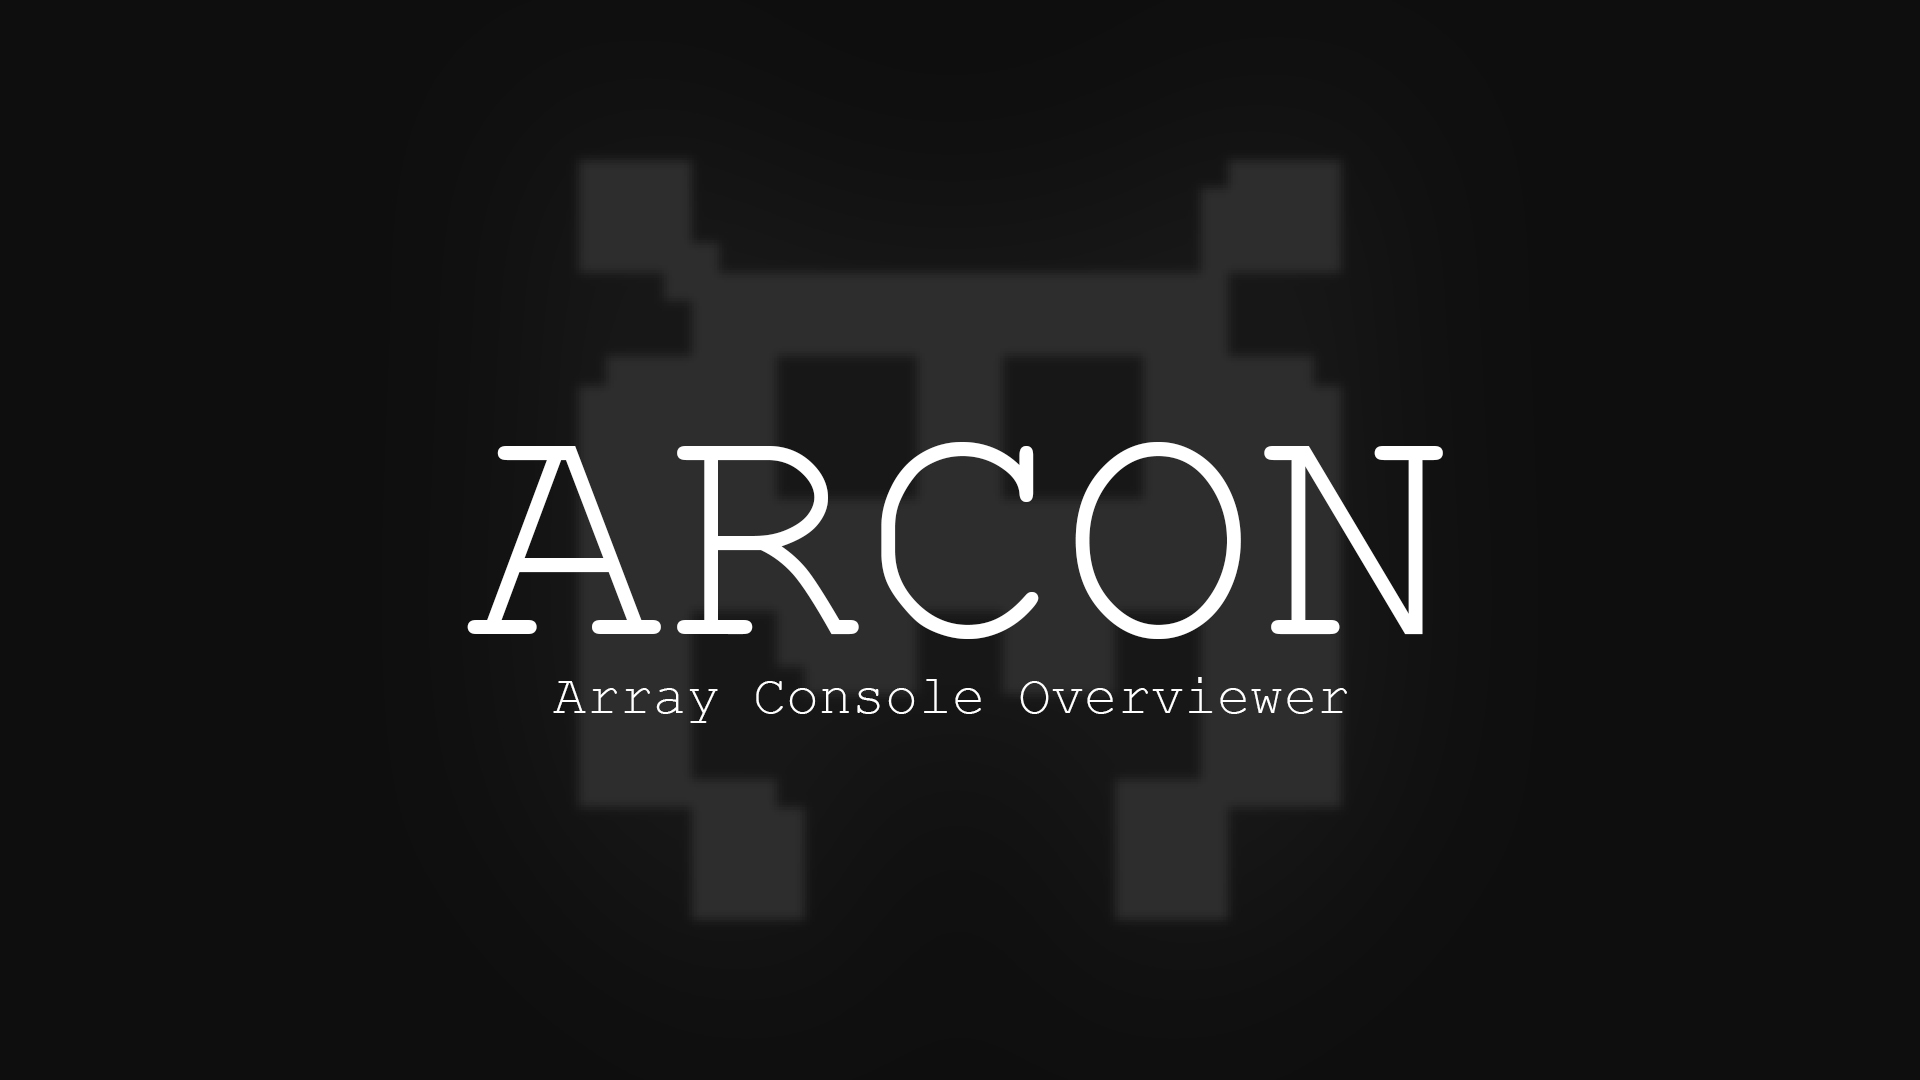 ARCON - Array Console Overviewer